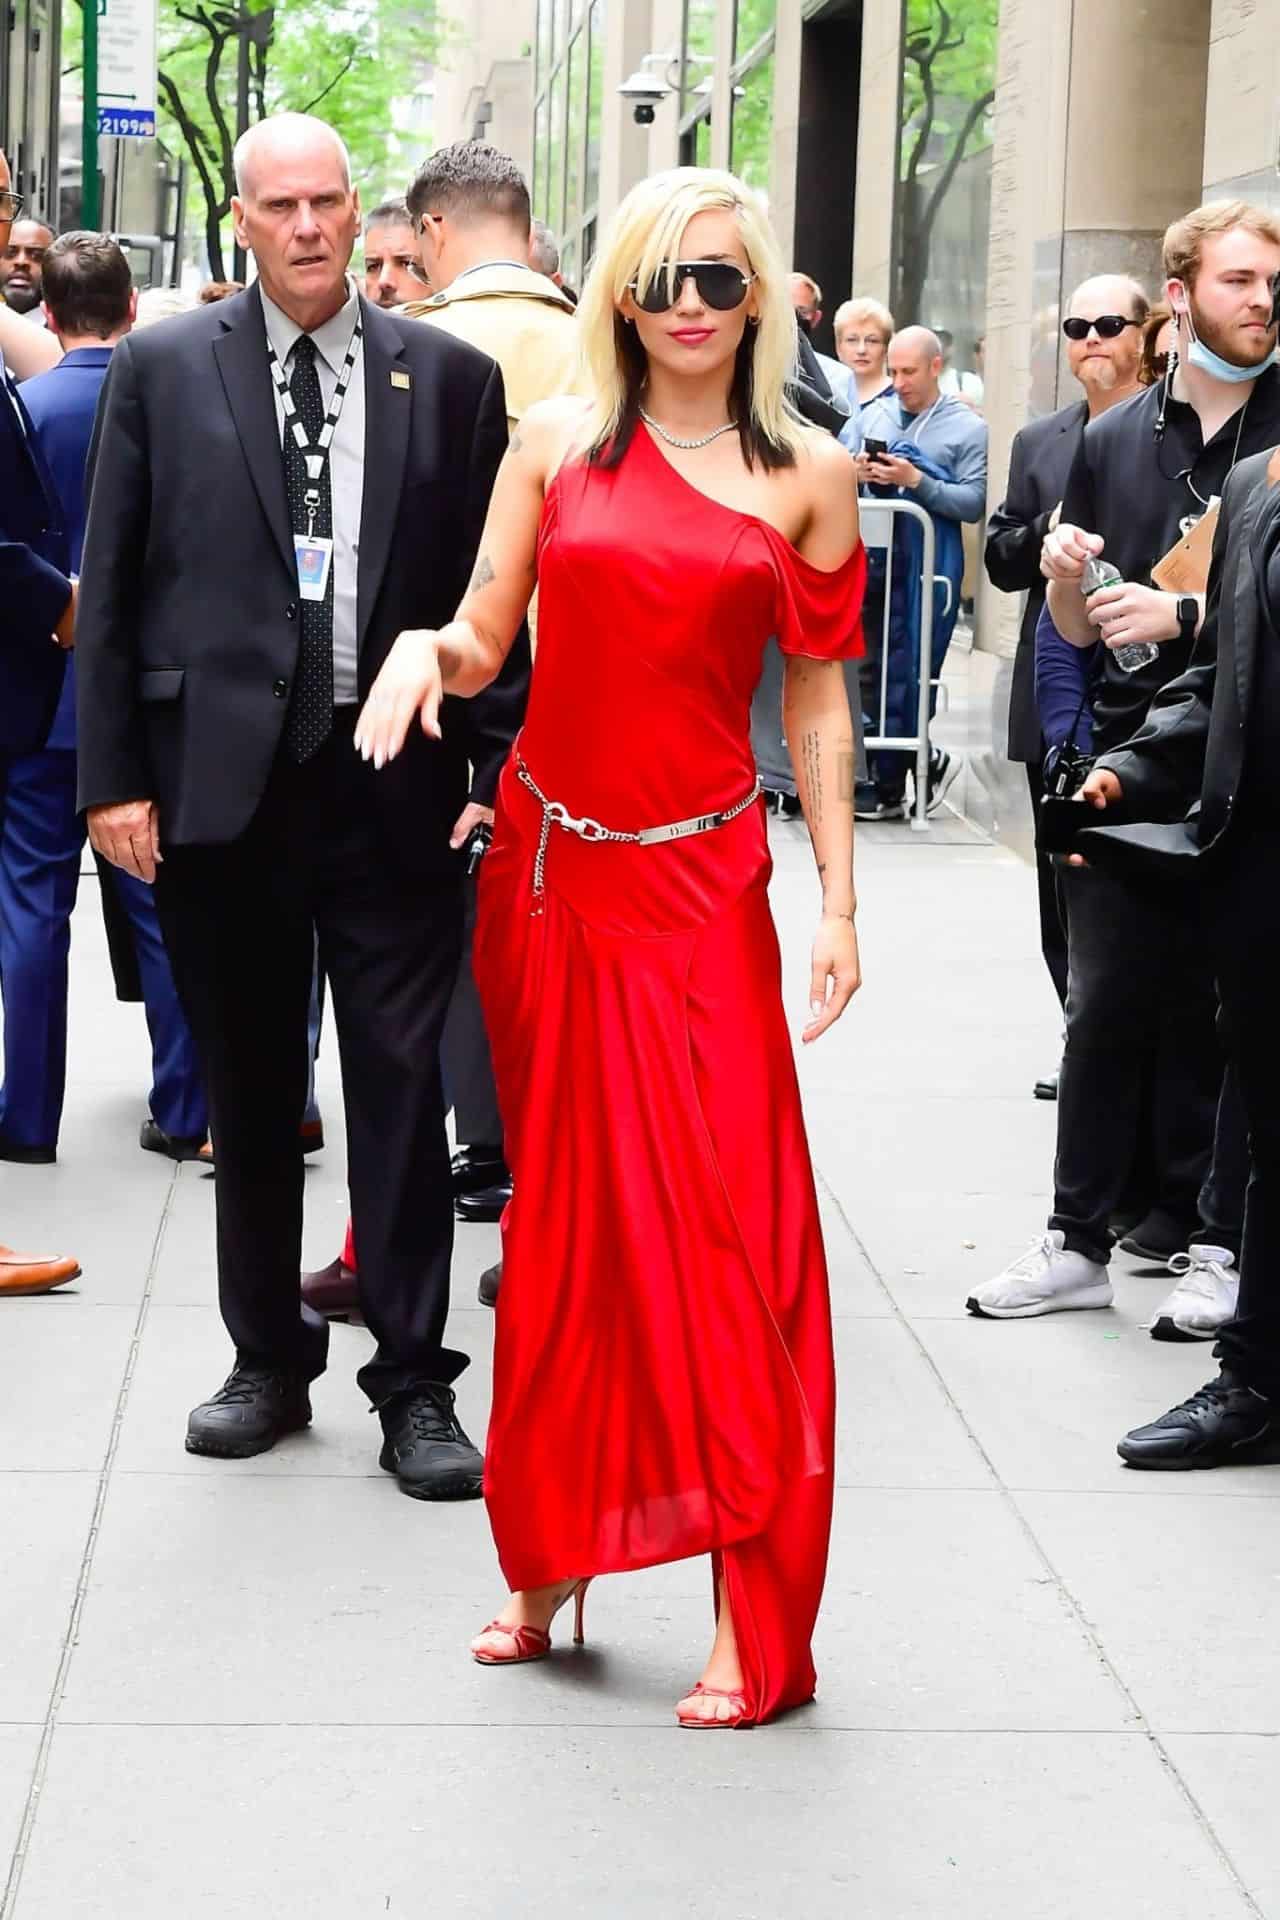 Miley Cyrus Looks Perfect in Red Dress During NBC Upfronts Press Tour